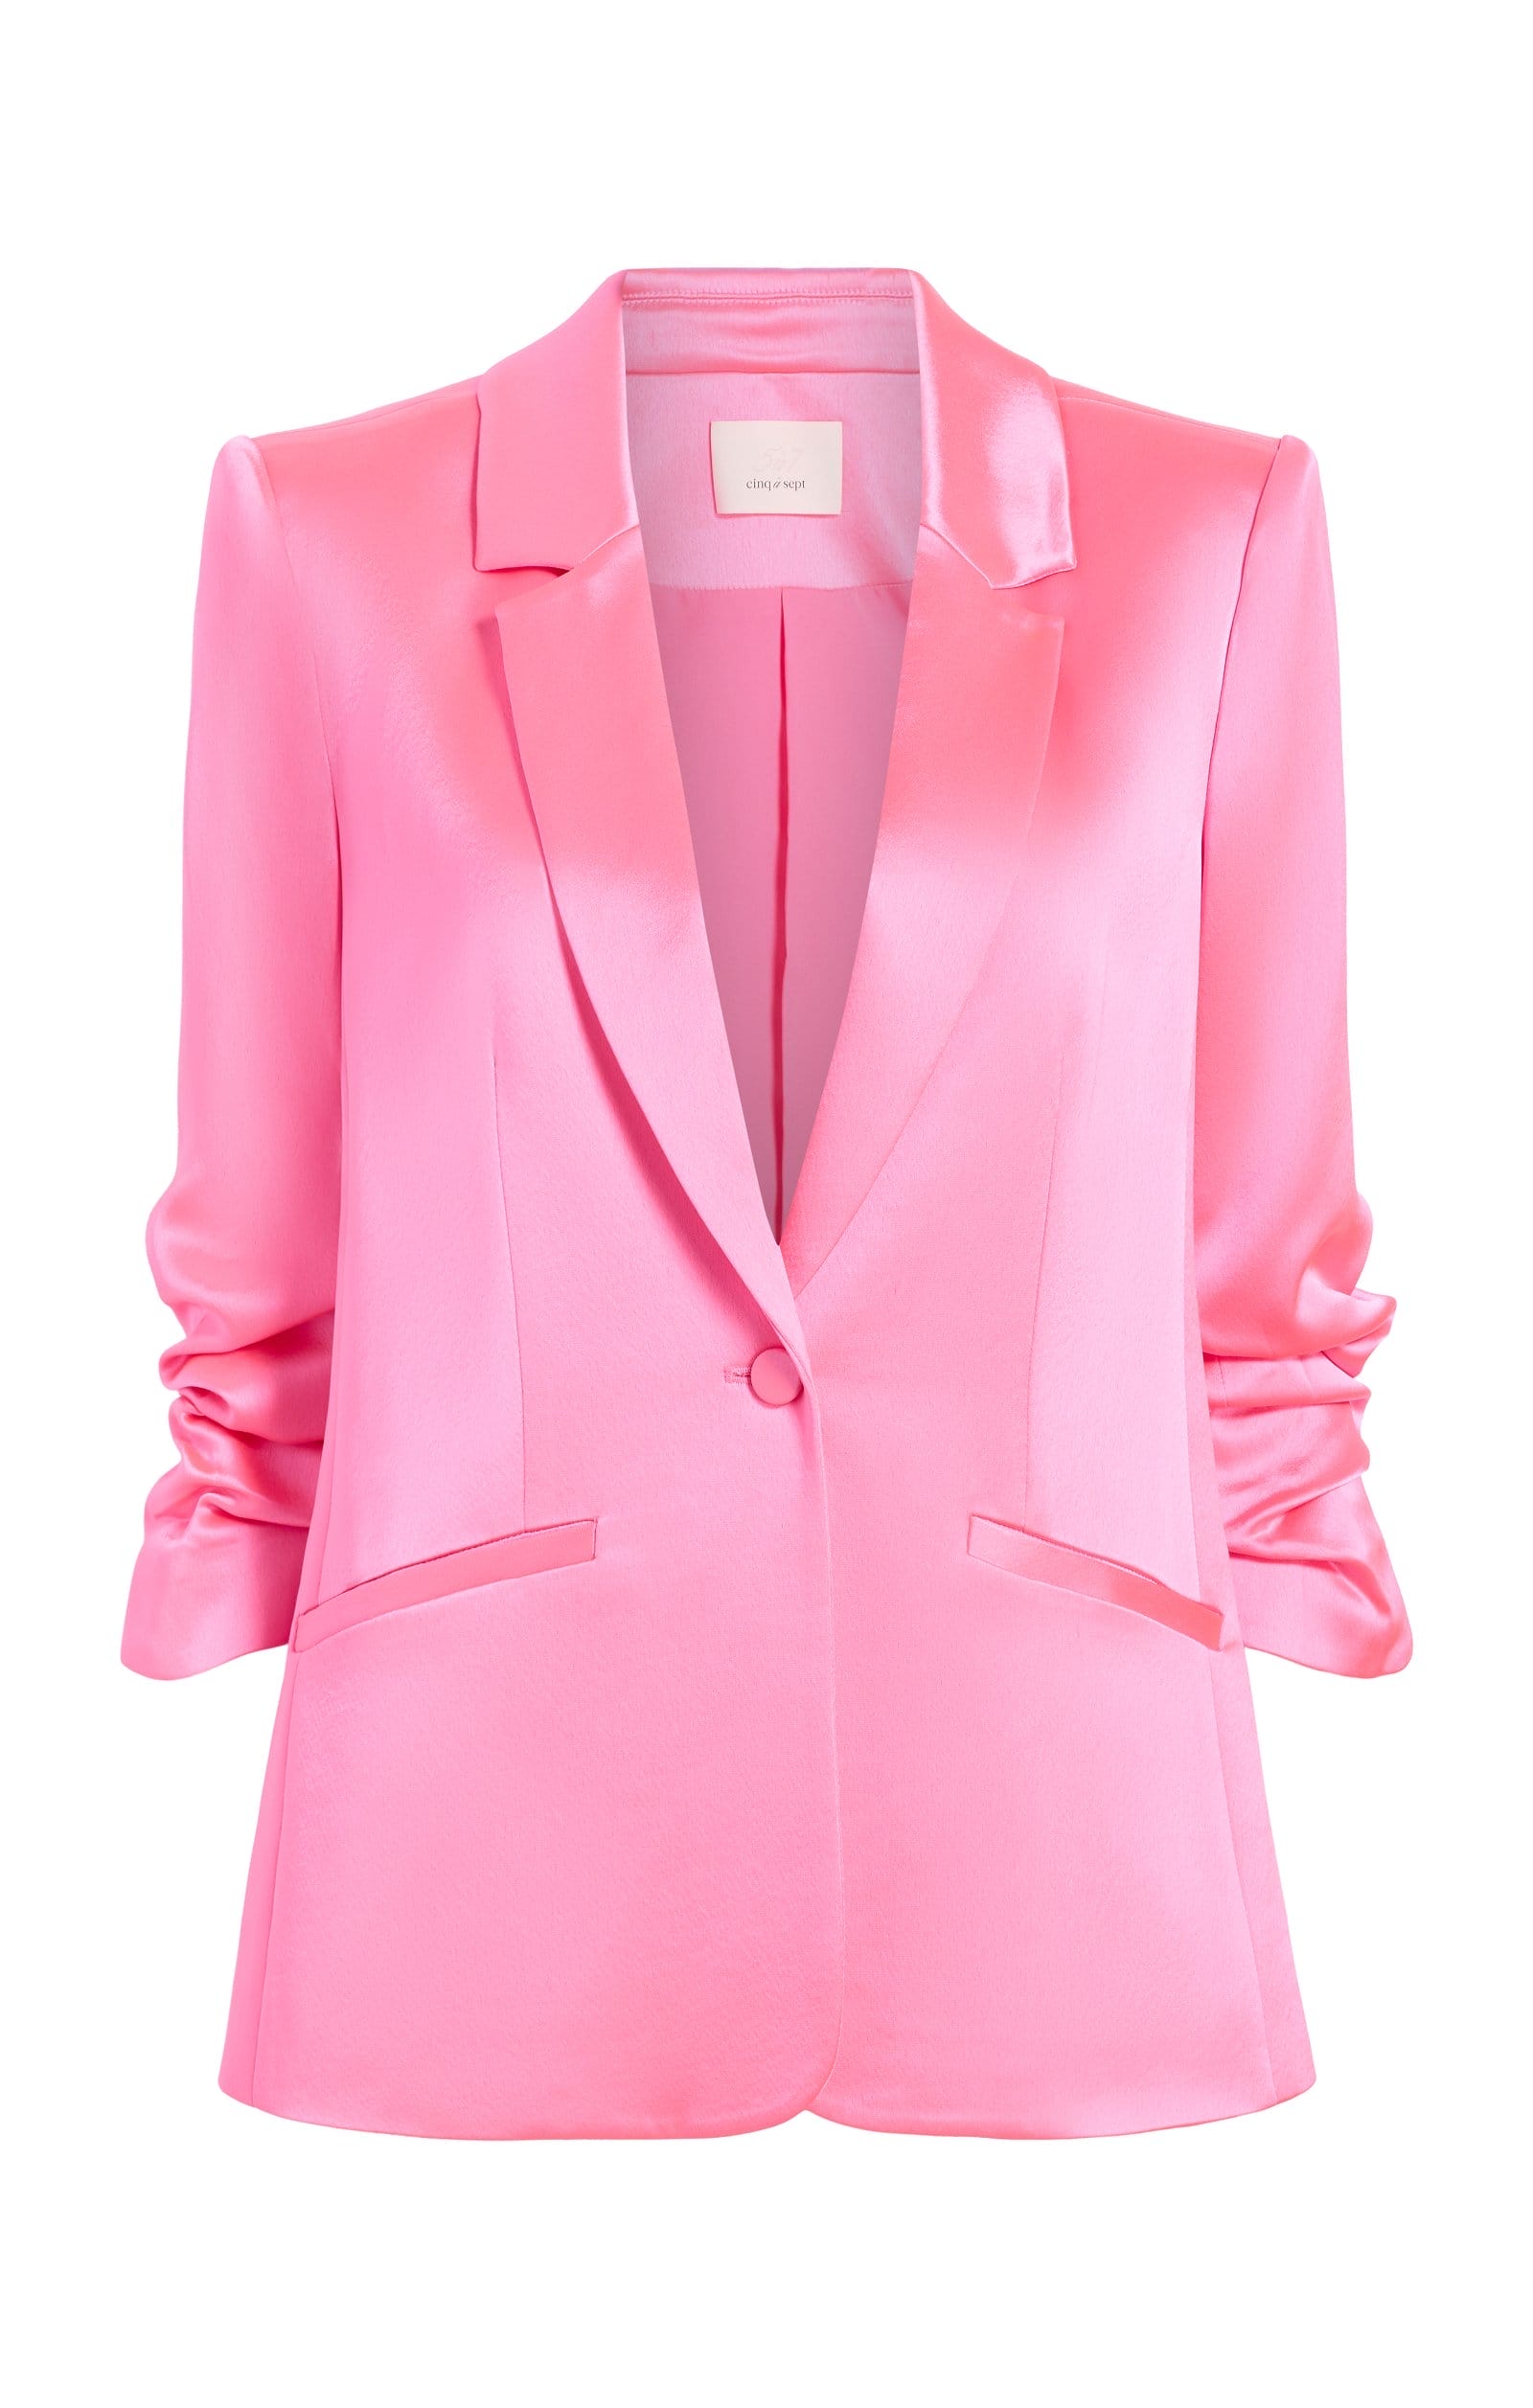 https://cinqasept.nyc/collections/seasonal-sets/products/satin-kylie-blazer-in-electric-pink